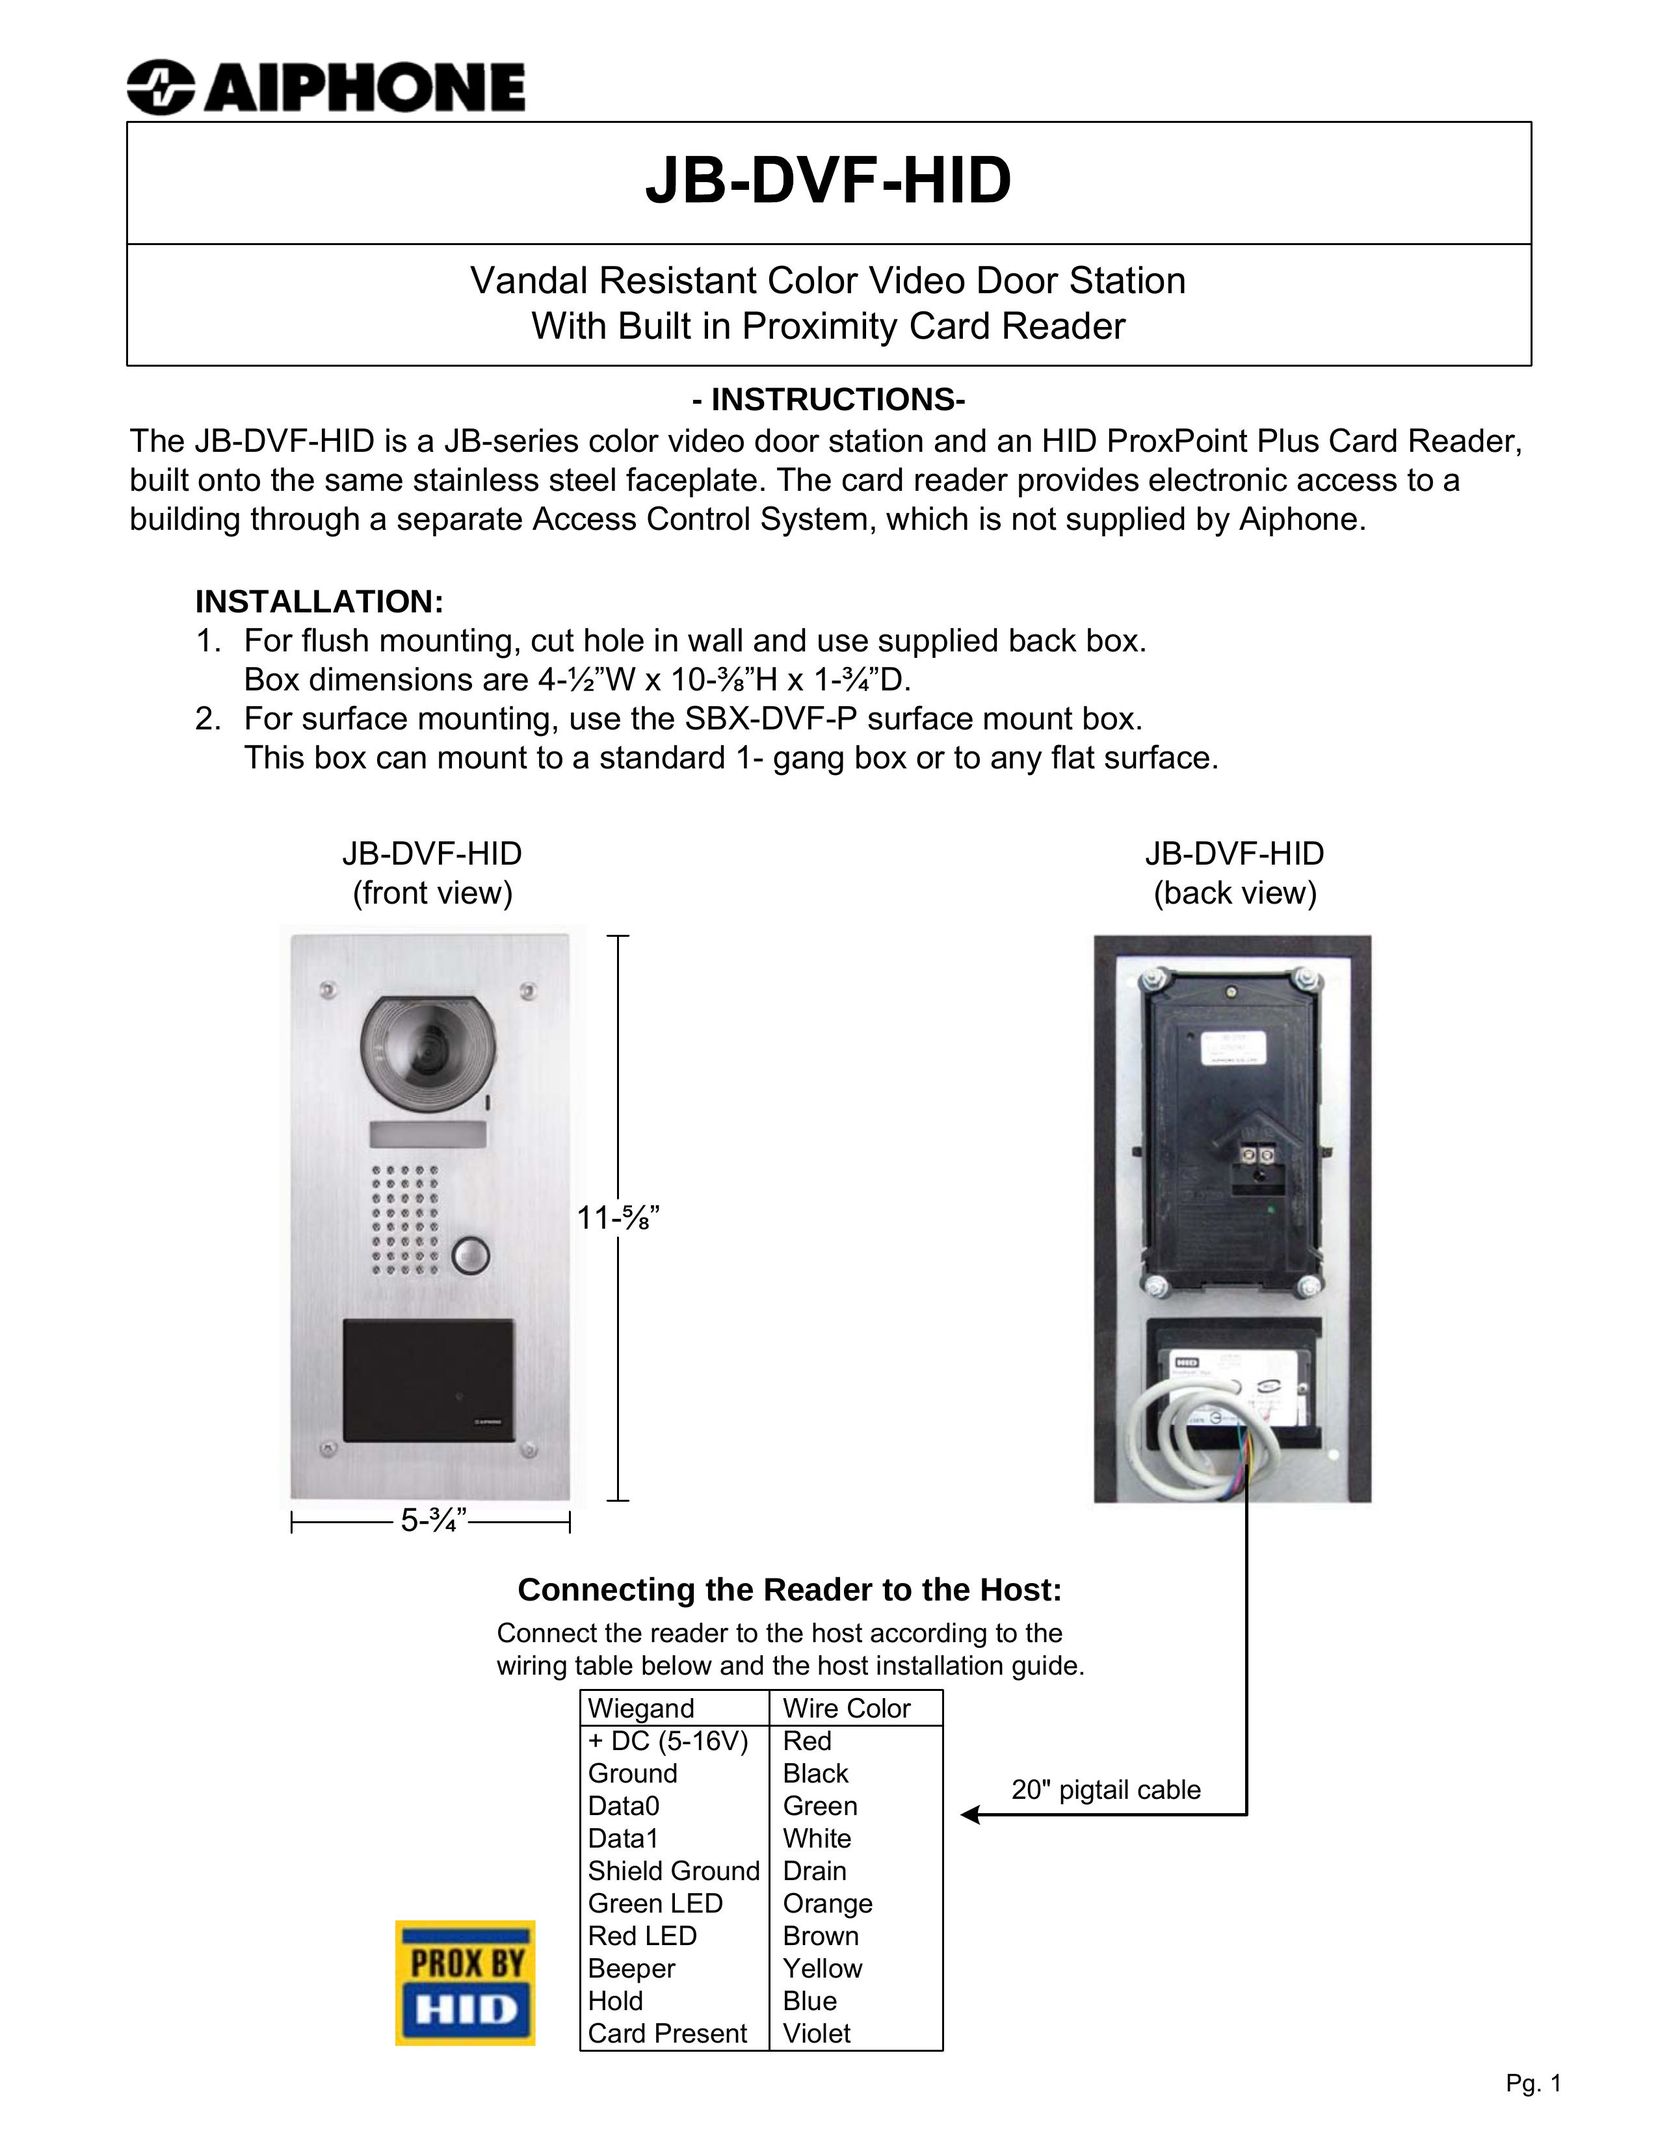 Aiphone JB-DVF-HID Home Security System User Manual